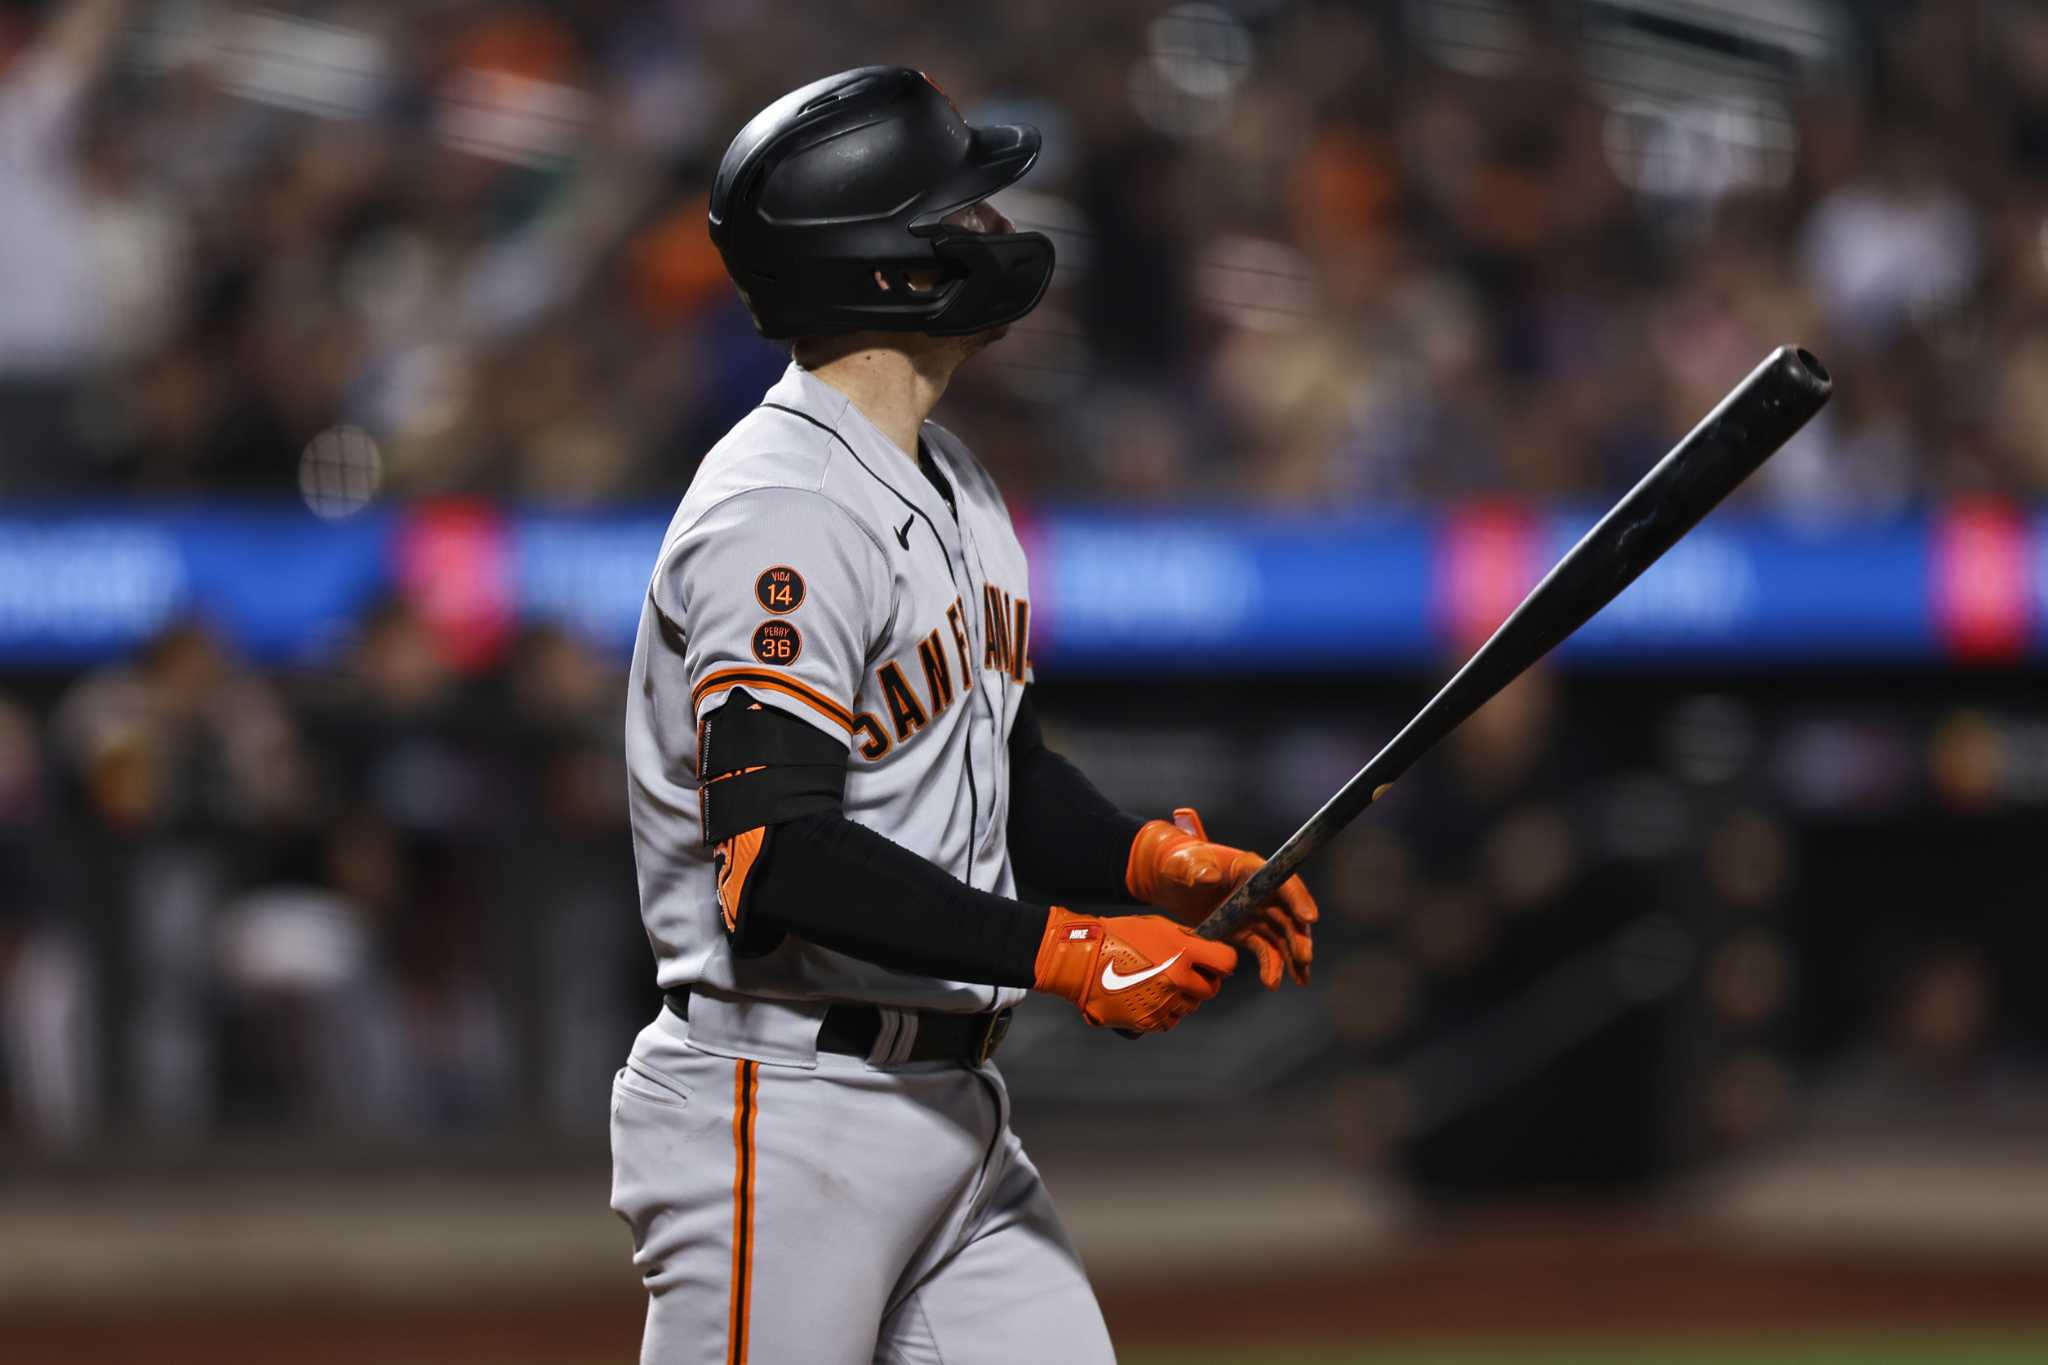 Giants' rookie catcher Patrick Bailey beats Mets with late home run